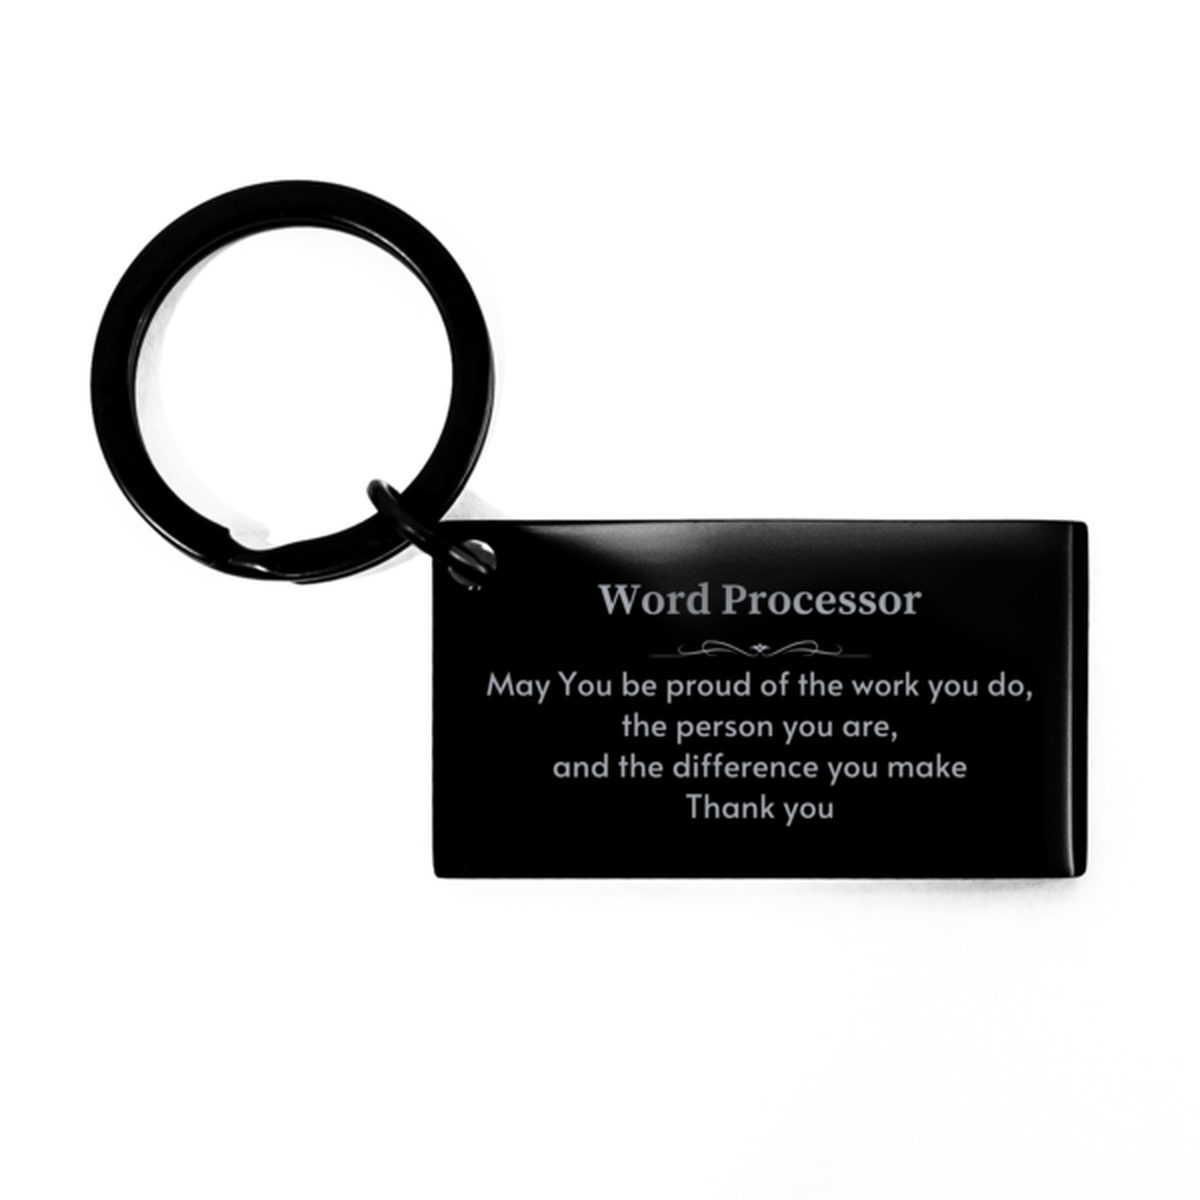 Heartwarming Keychain Retirement Coworkers Gifts for Word Processor, Attendant May You be proud of the work you do, the person you are Gifts for Boss Men Women Friends